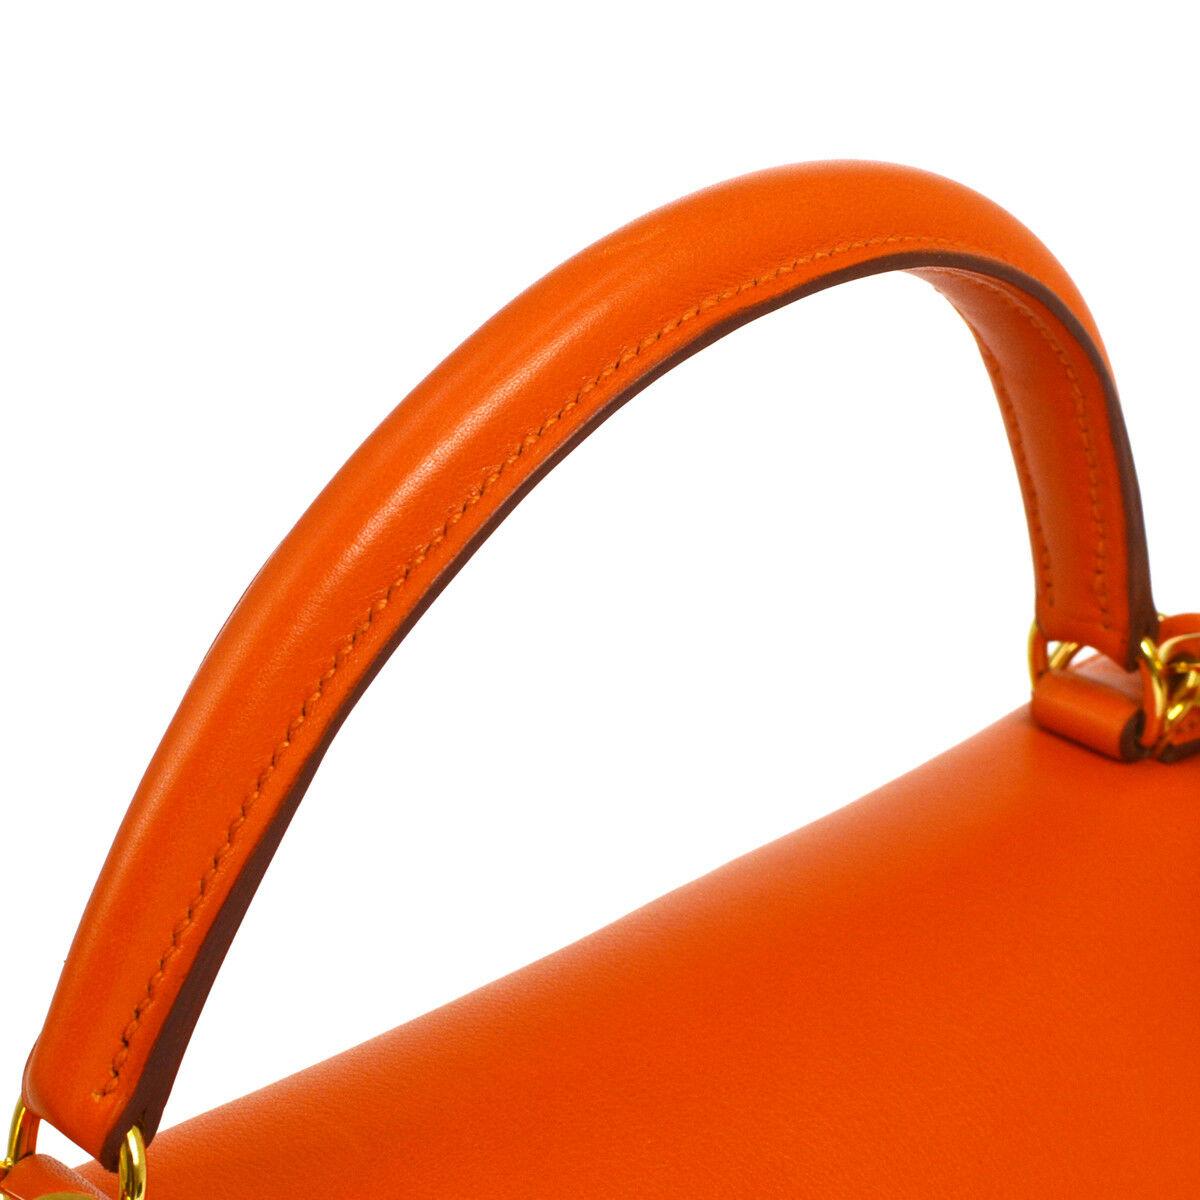 Hermes Kelly 32 Orange Leather Gold Top Handle Satchel Evening Kelly Bag

Leather
Gold tone hardware
Leather lining
Date code present
Made in France
Top Handle 3